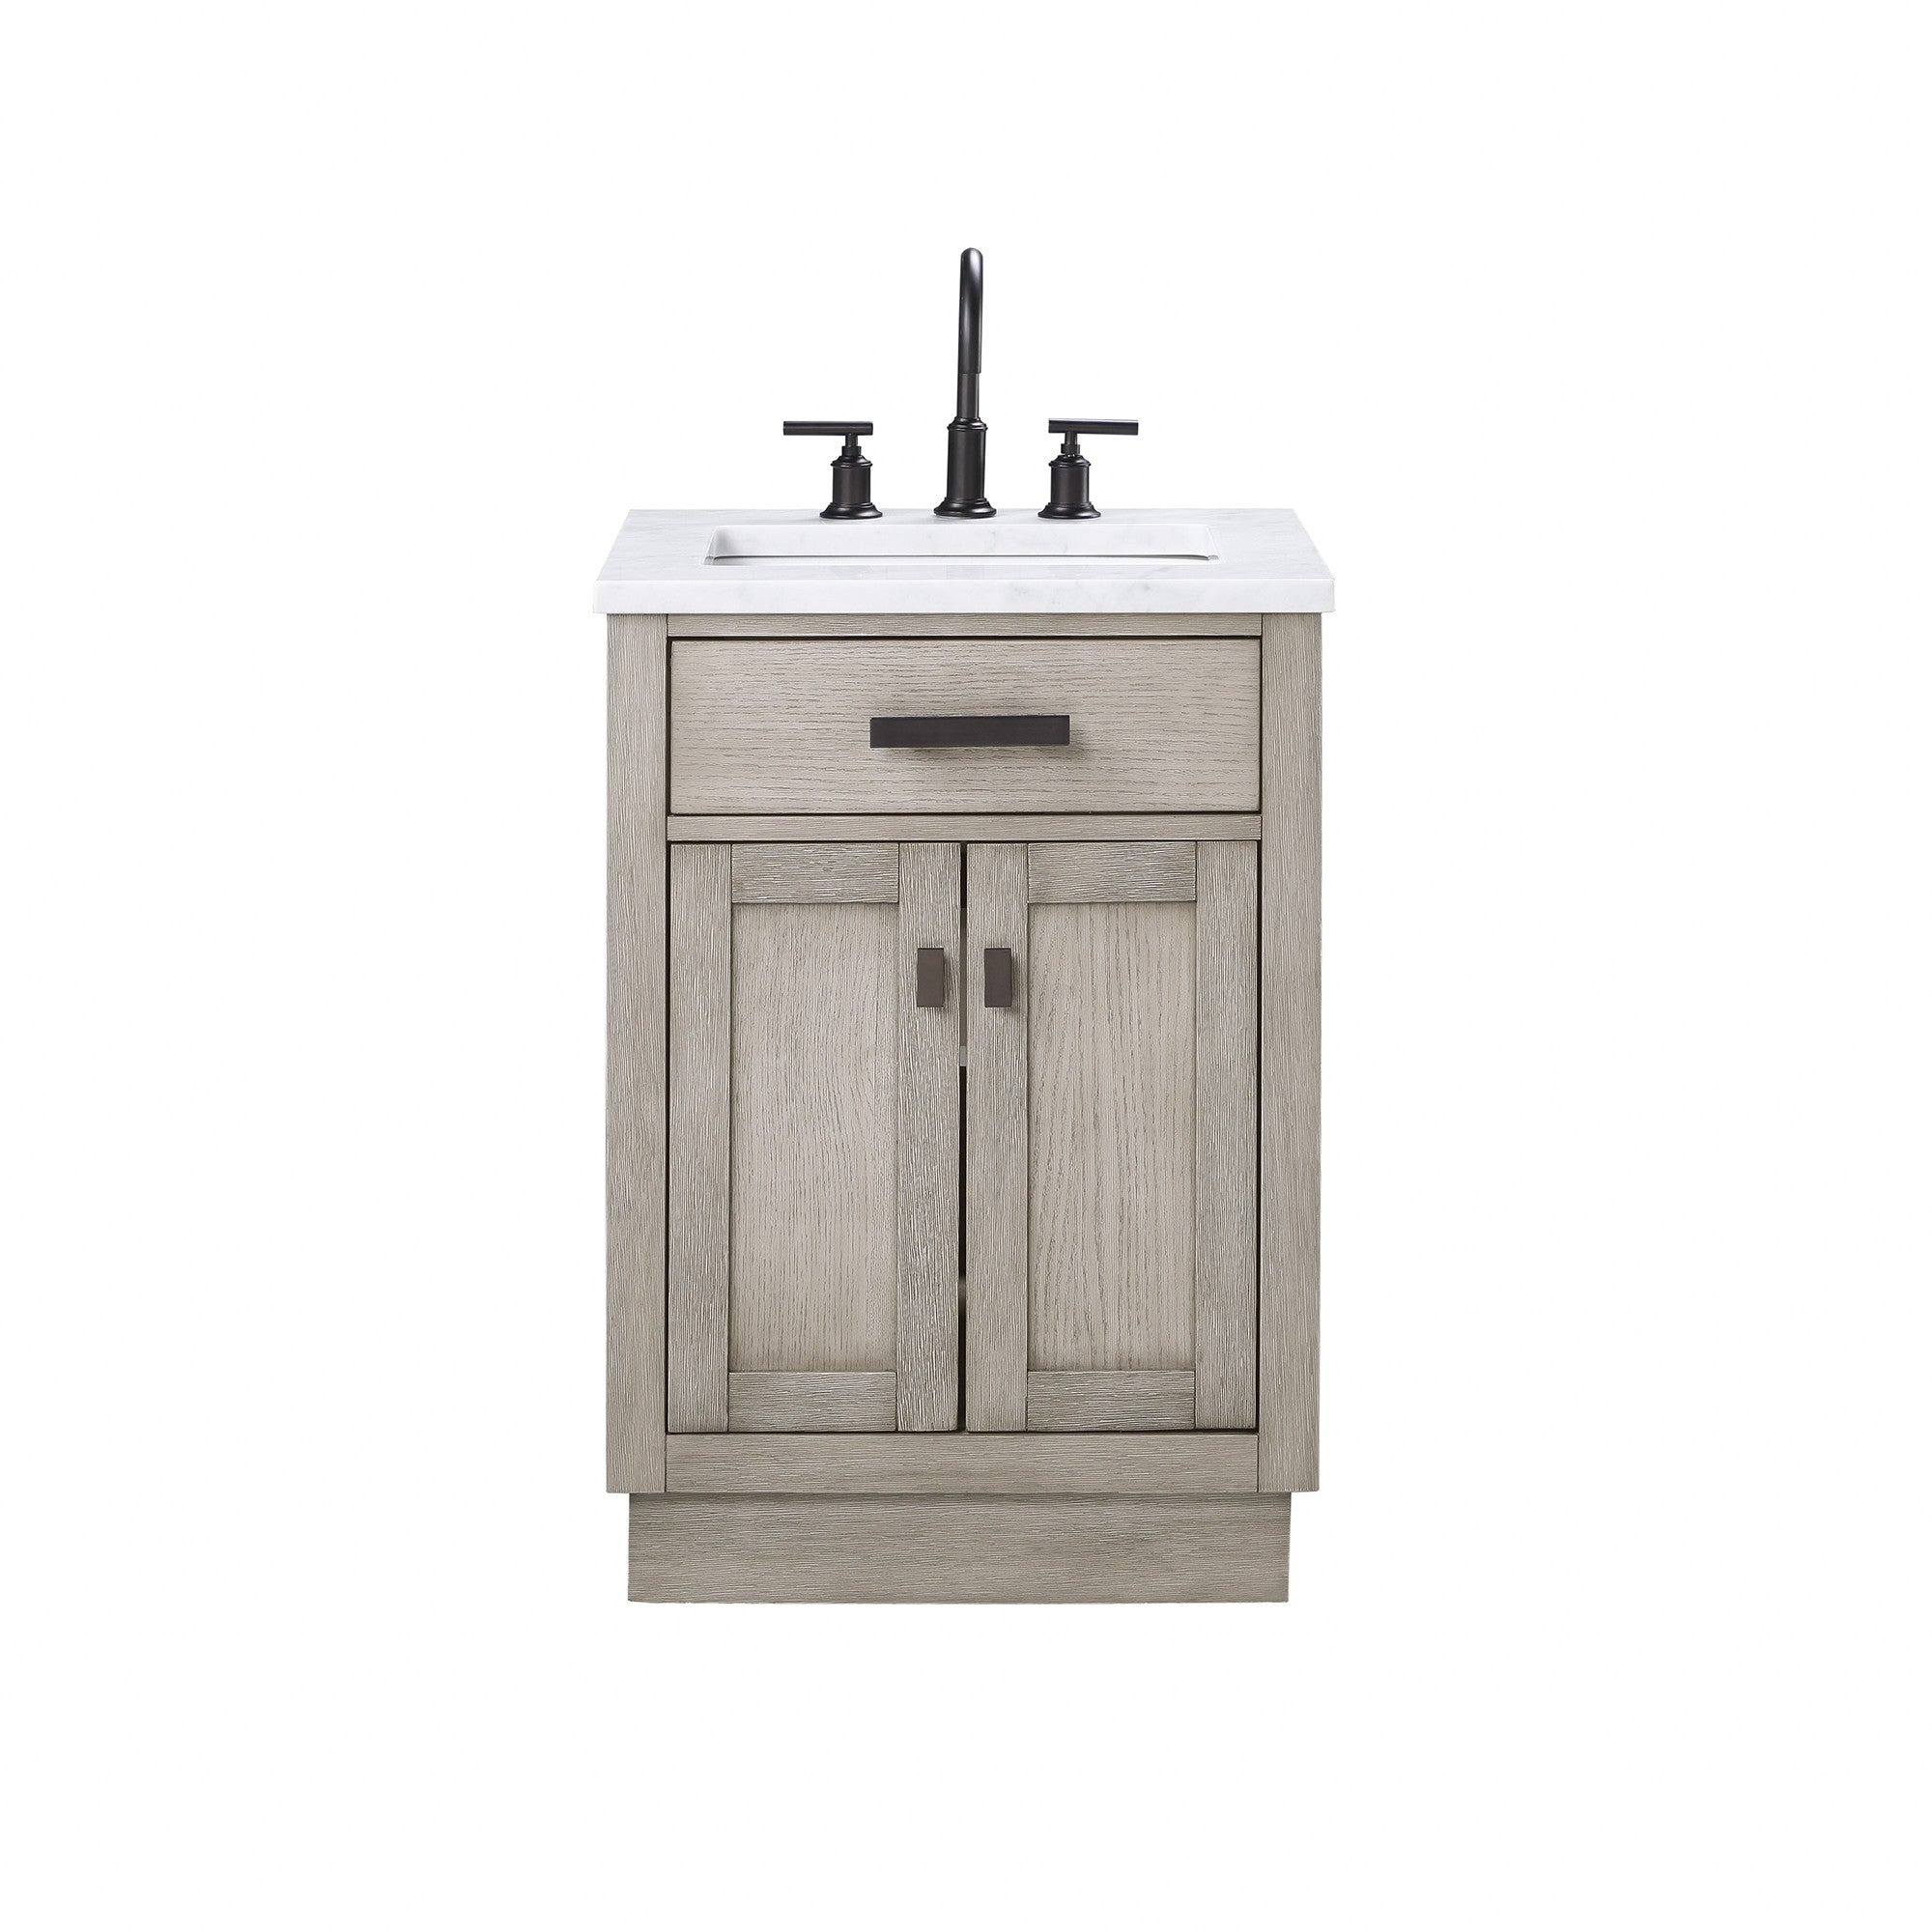 Water Creation 24" Chestnut Single Sink Carrara White Marble Countertop Vanity In Grey Oak with Mirror - CH24CW03GK-R21000000